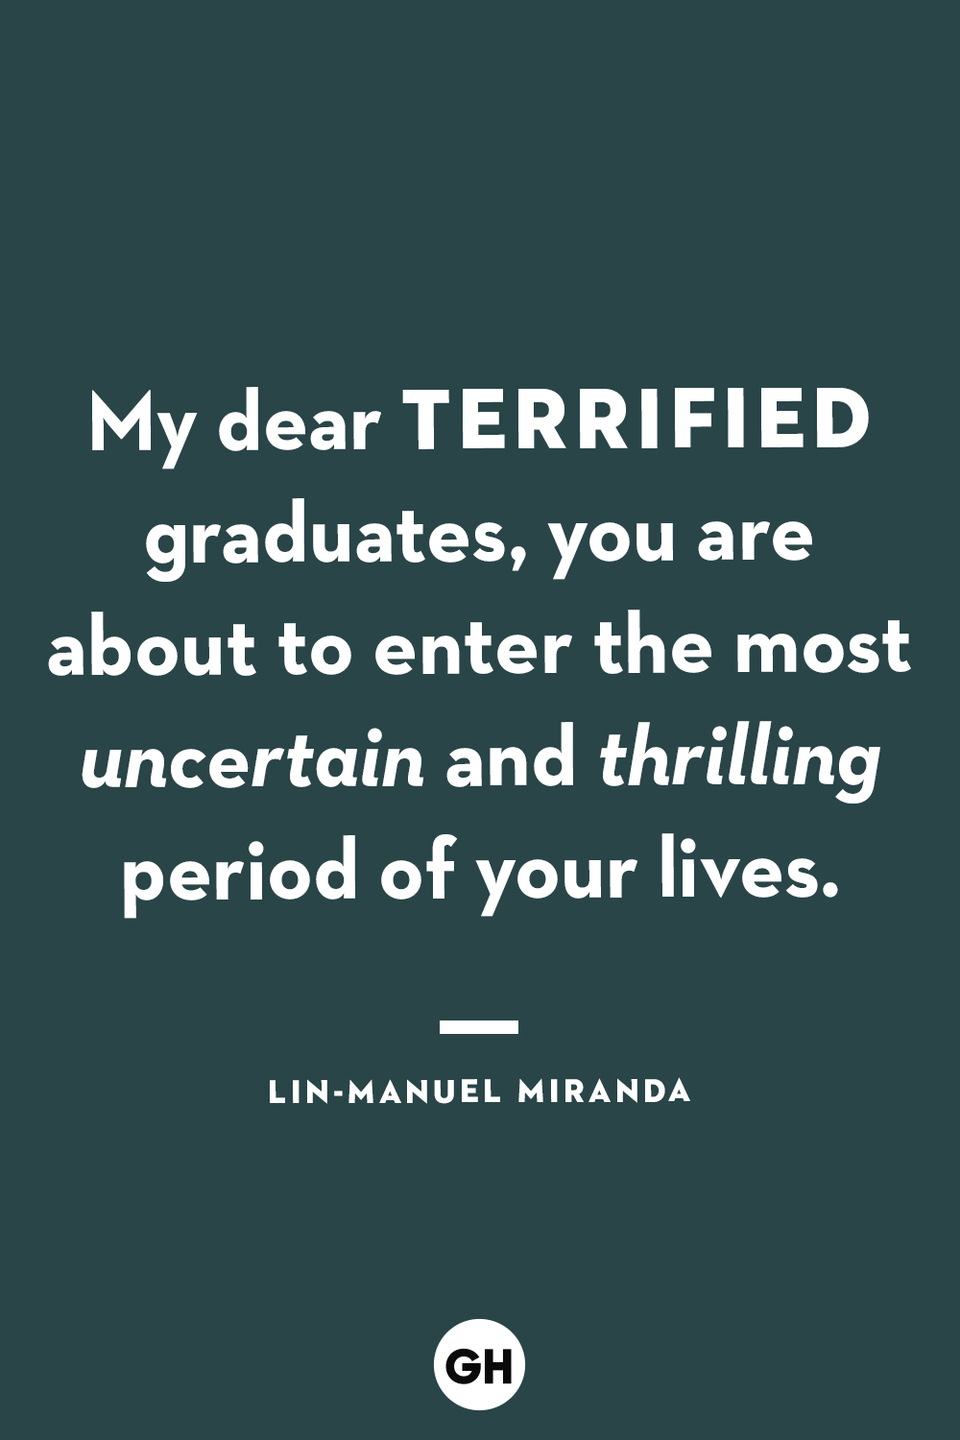 <p>My dear terrified graduates, you are about to enter the most uncertain and thrilling period of your lives.</p>